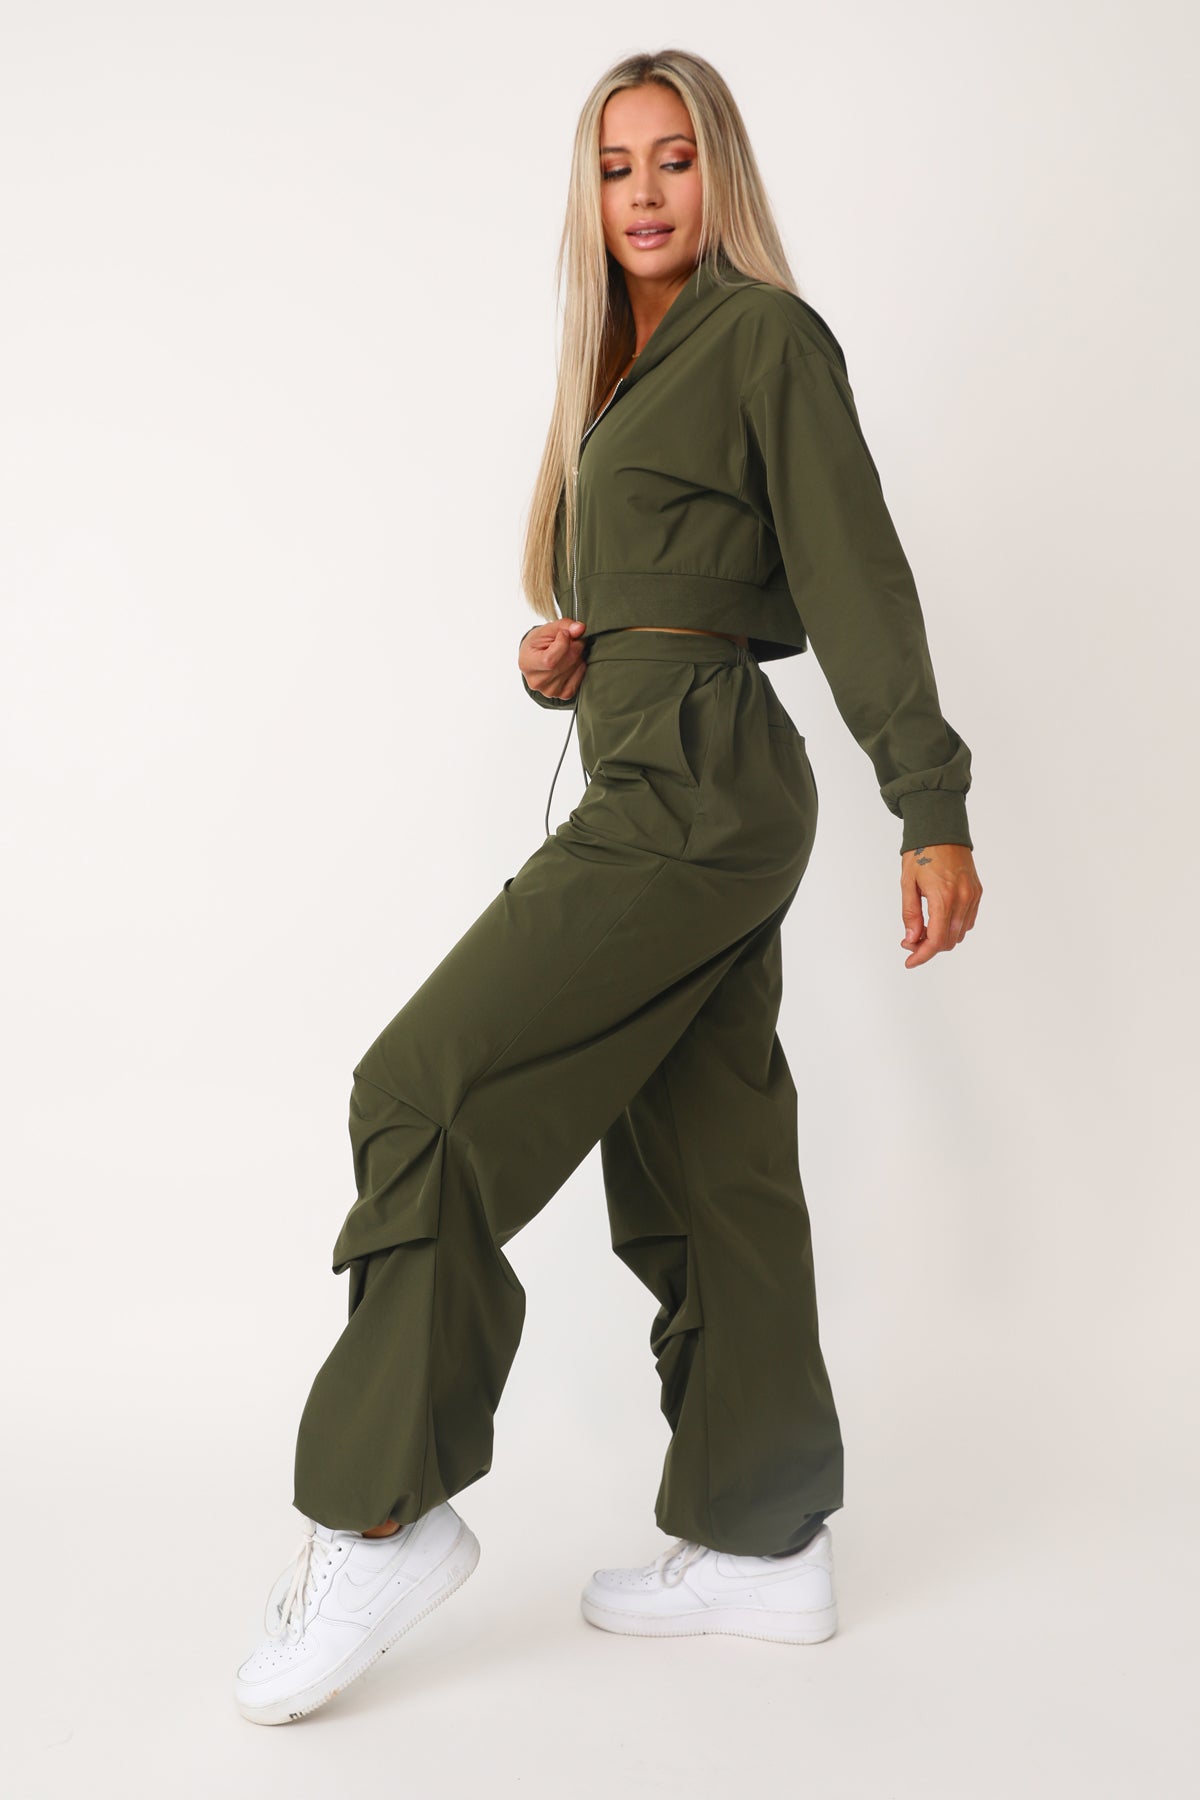 Model wearing the Run Down jogger with bungees.